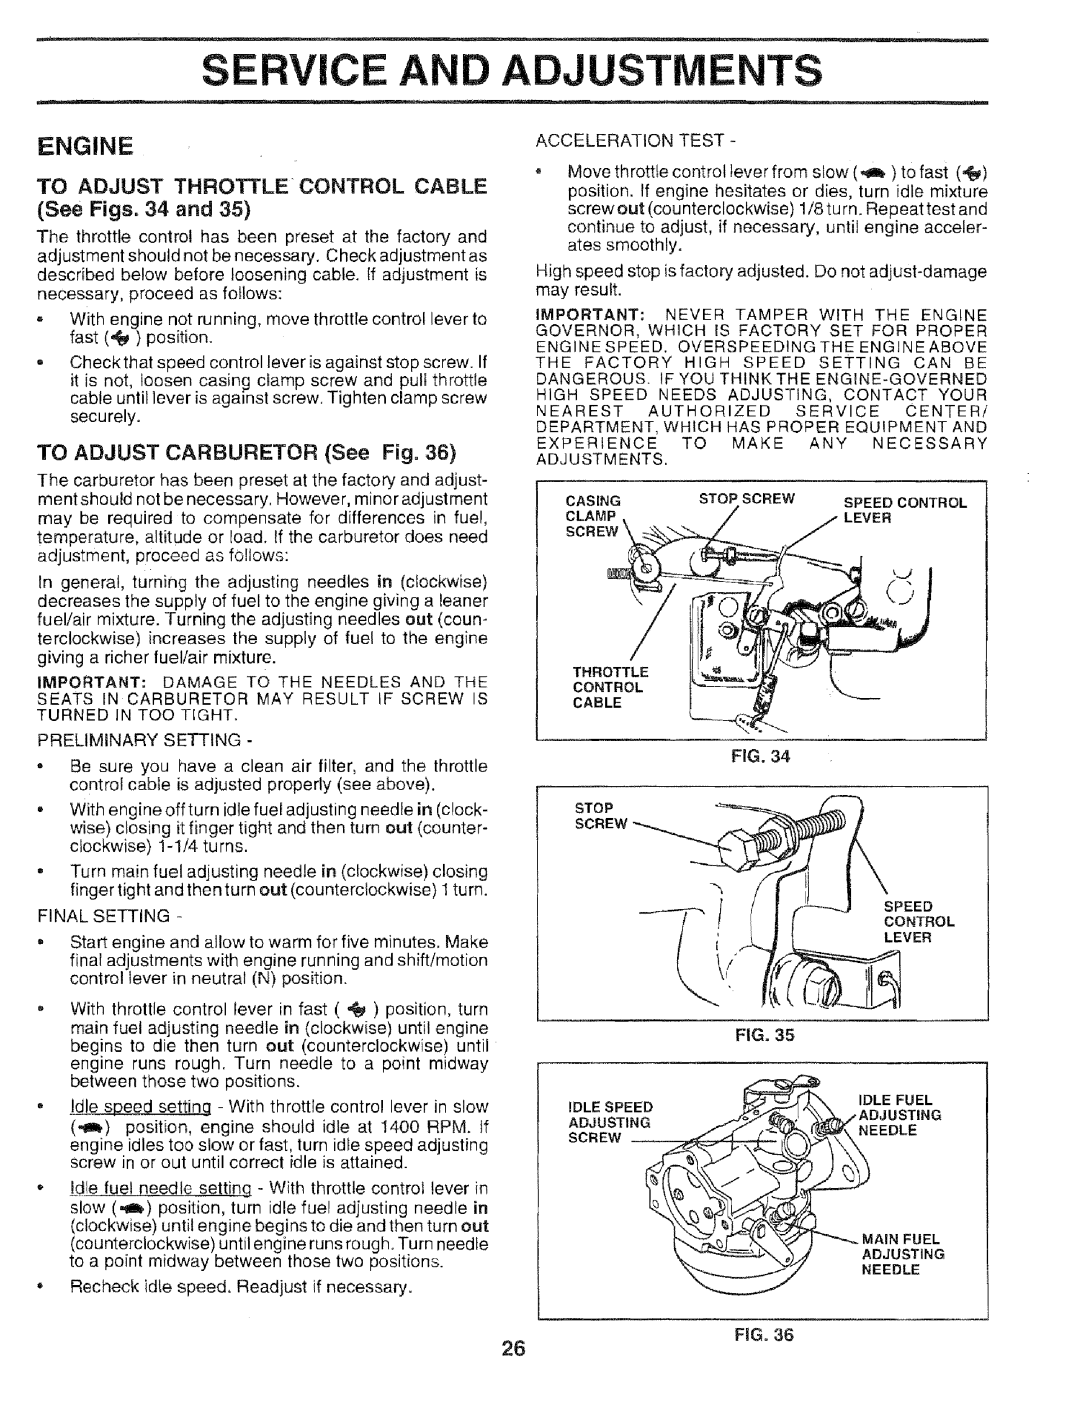 Sears 917.25051 manual RViCE ADJUSTMENTS, Engine, TO ADJUST THROTTLE CONTROL CABLE See Figs. 34 and, FiG 